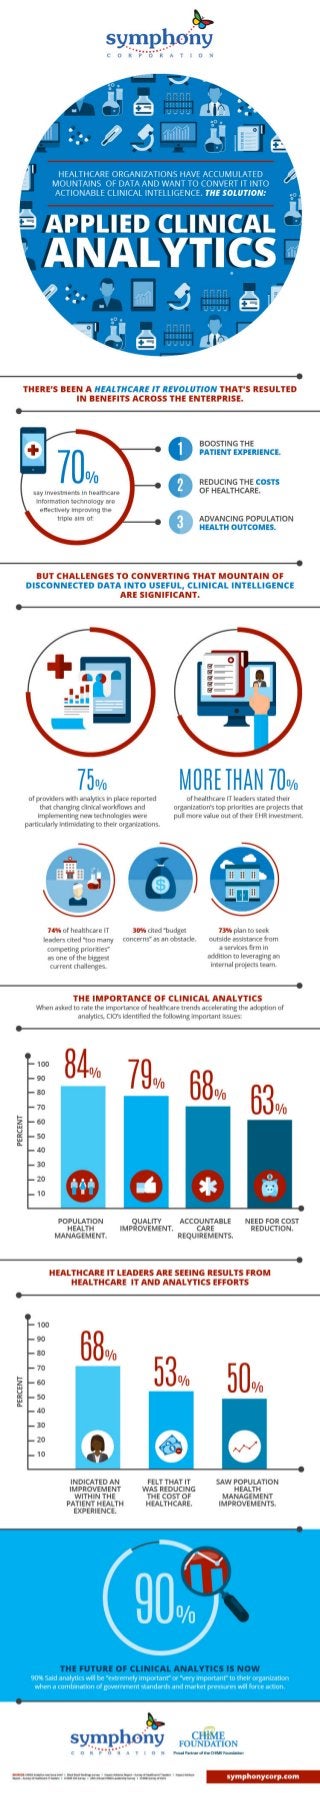 Applied Clinical Analytics - A Data First Approach to Clinical Intelligence